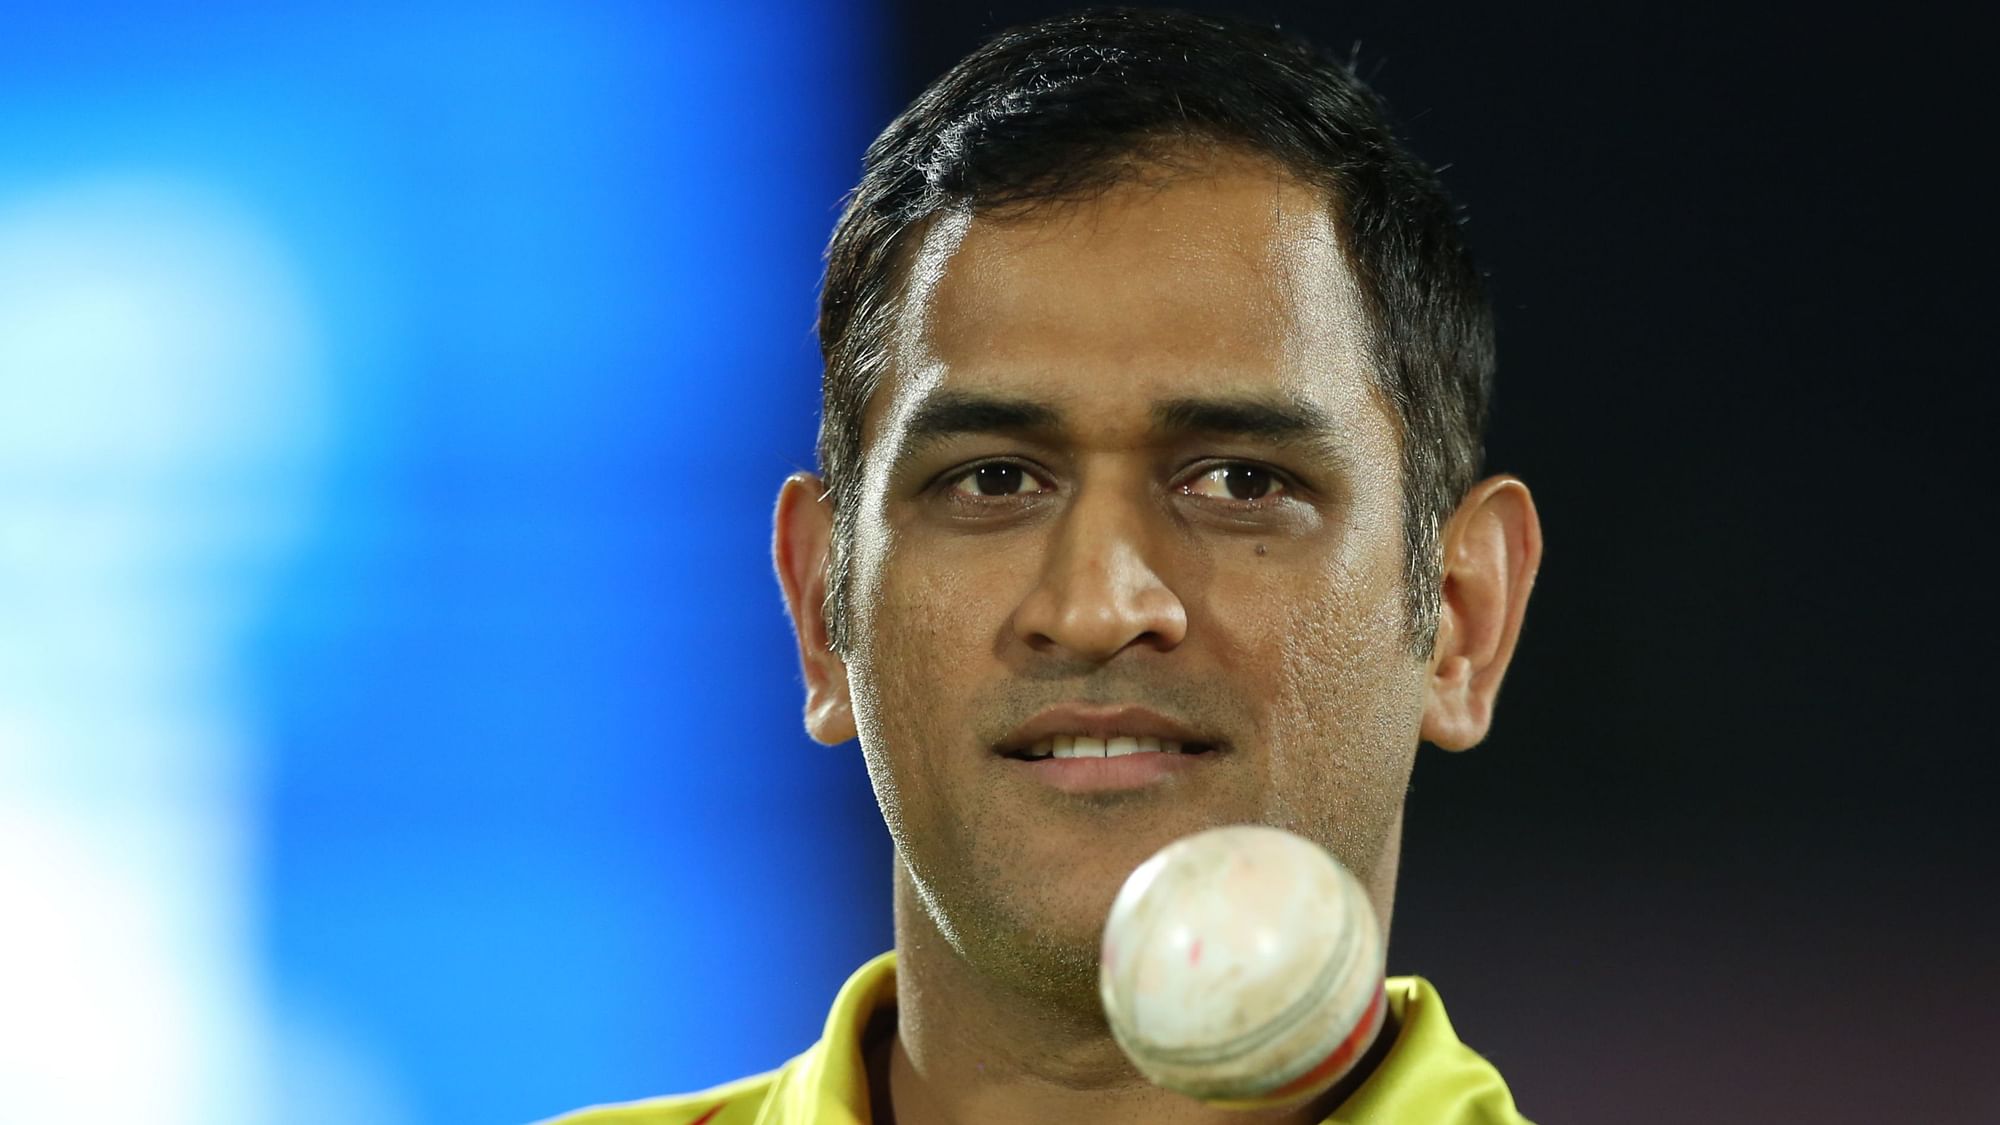 MS Dhoni during match 25 of the Vivo Indian Premier League Season 12, 2019 between the Rajasthan Royals and the Chennai Super Kings.